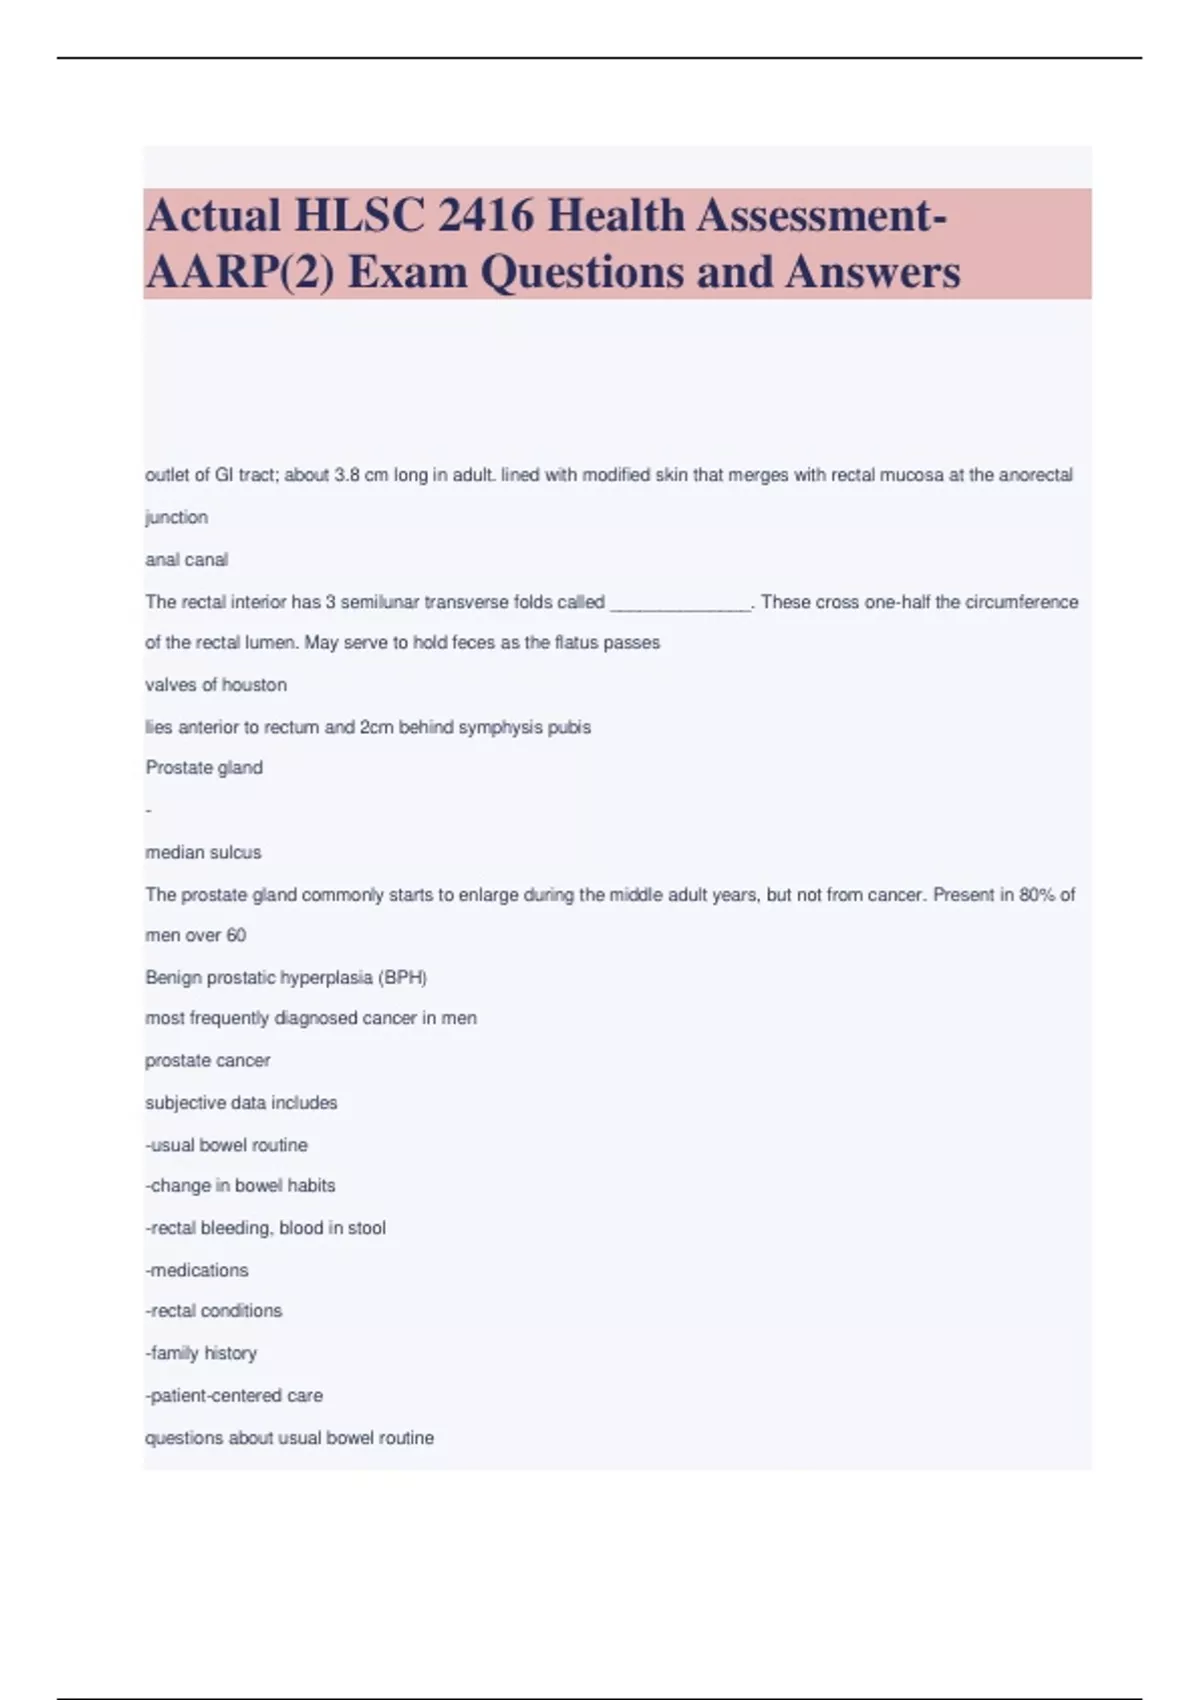 Actual HLSC 2416 Health Assessment AARP(2) Exam Questions and Answers